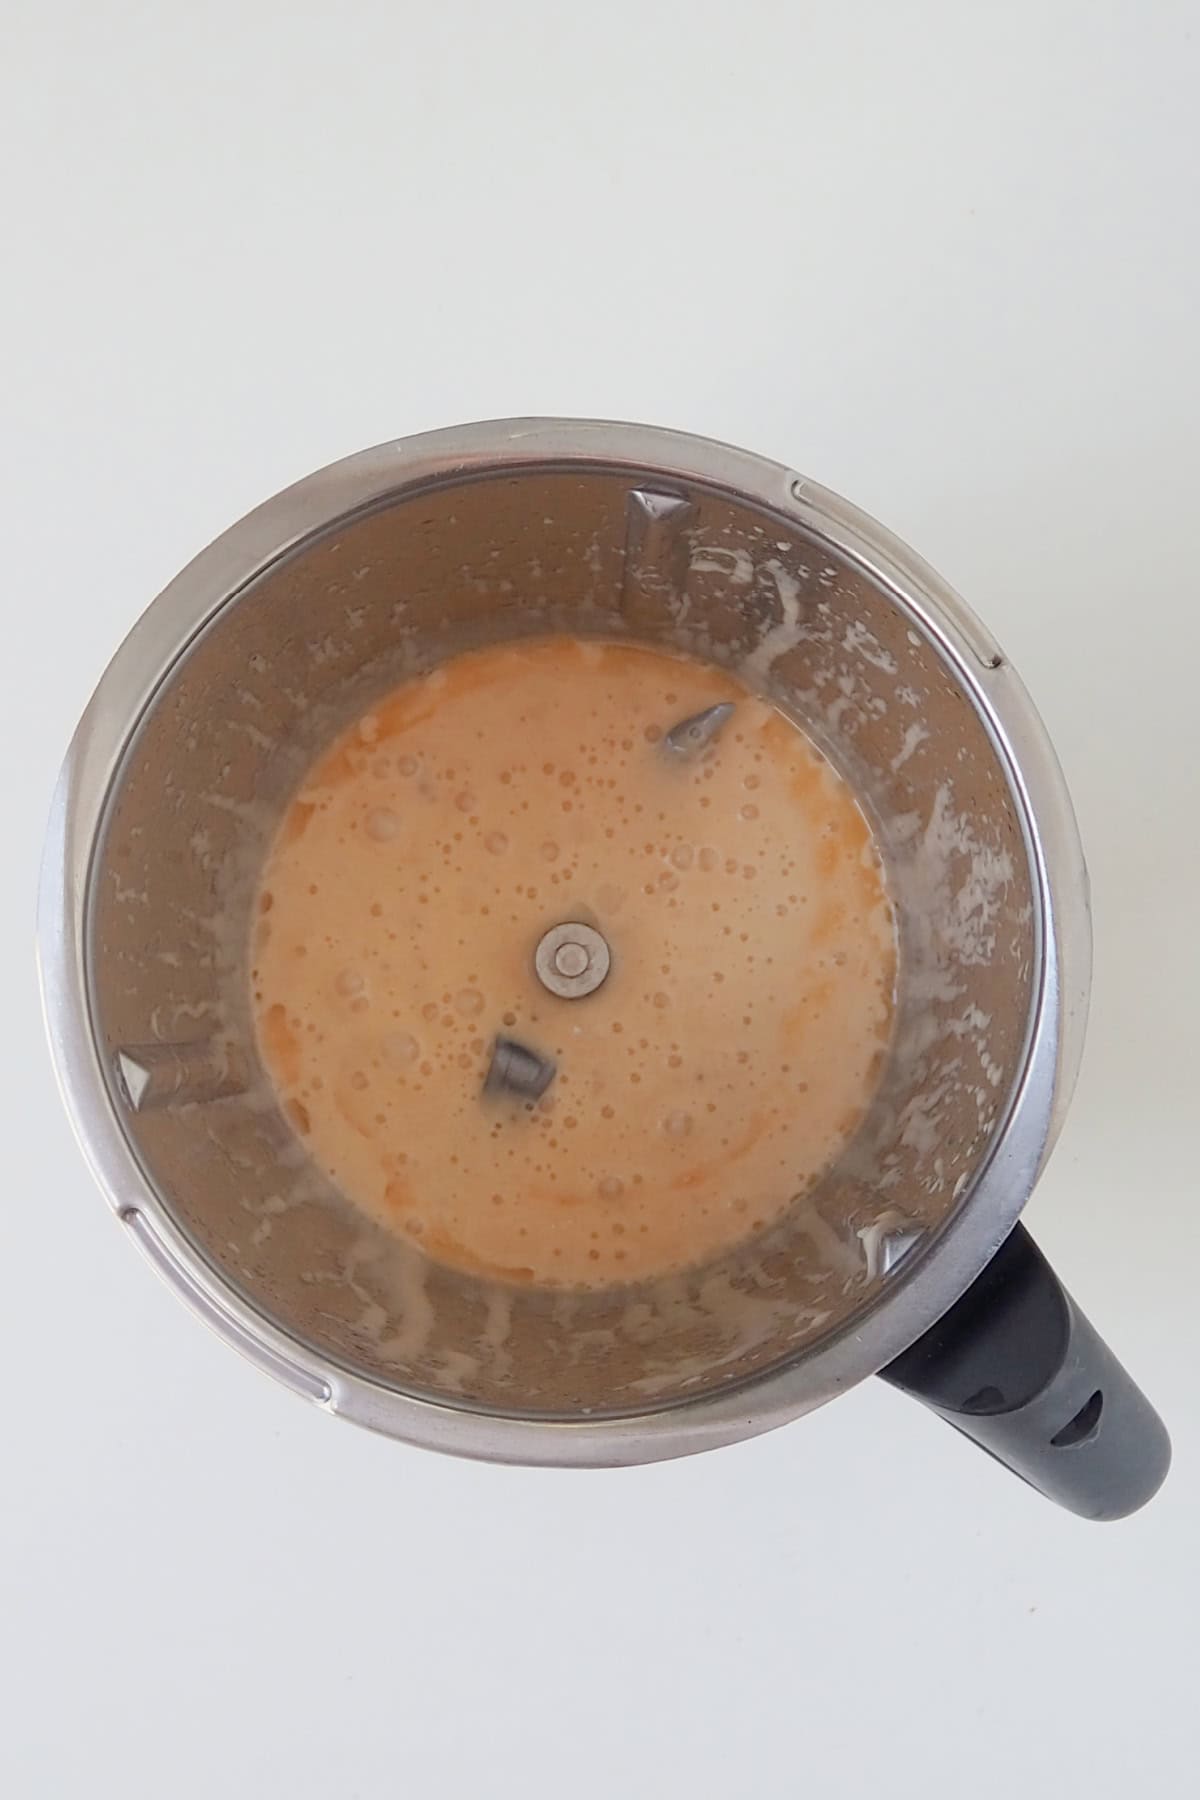 Combined coconut oil, mashed banana and pineapple in a thermomix bowl.